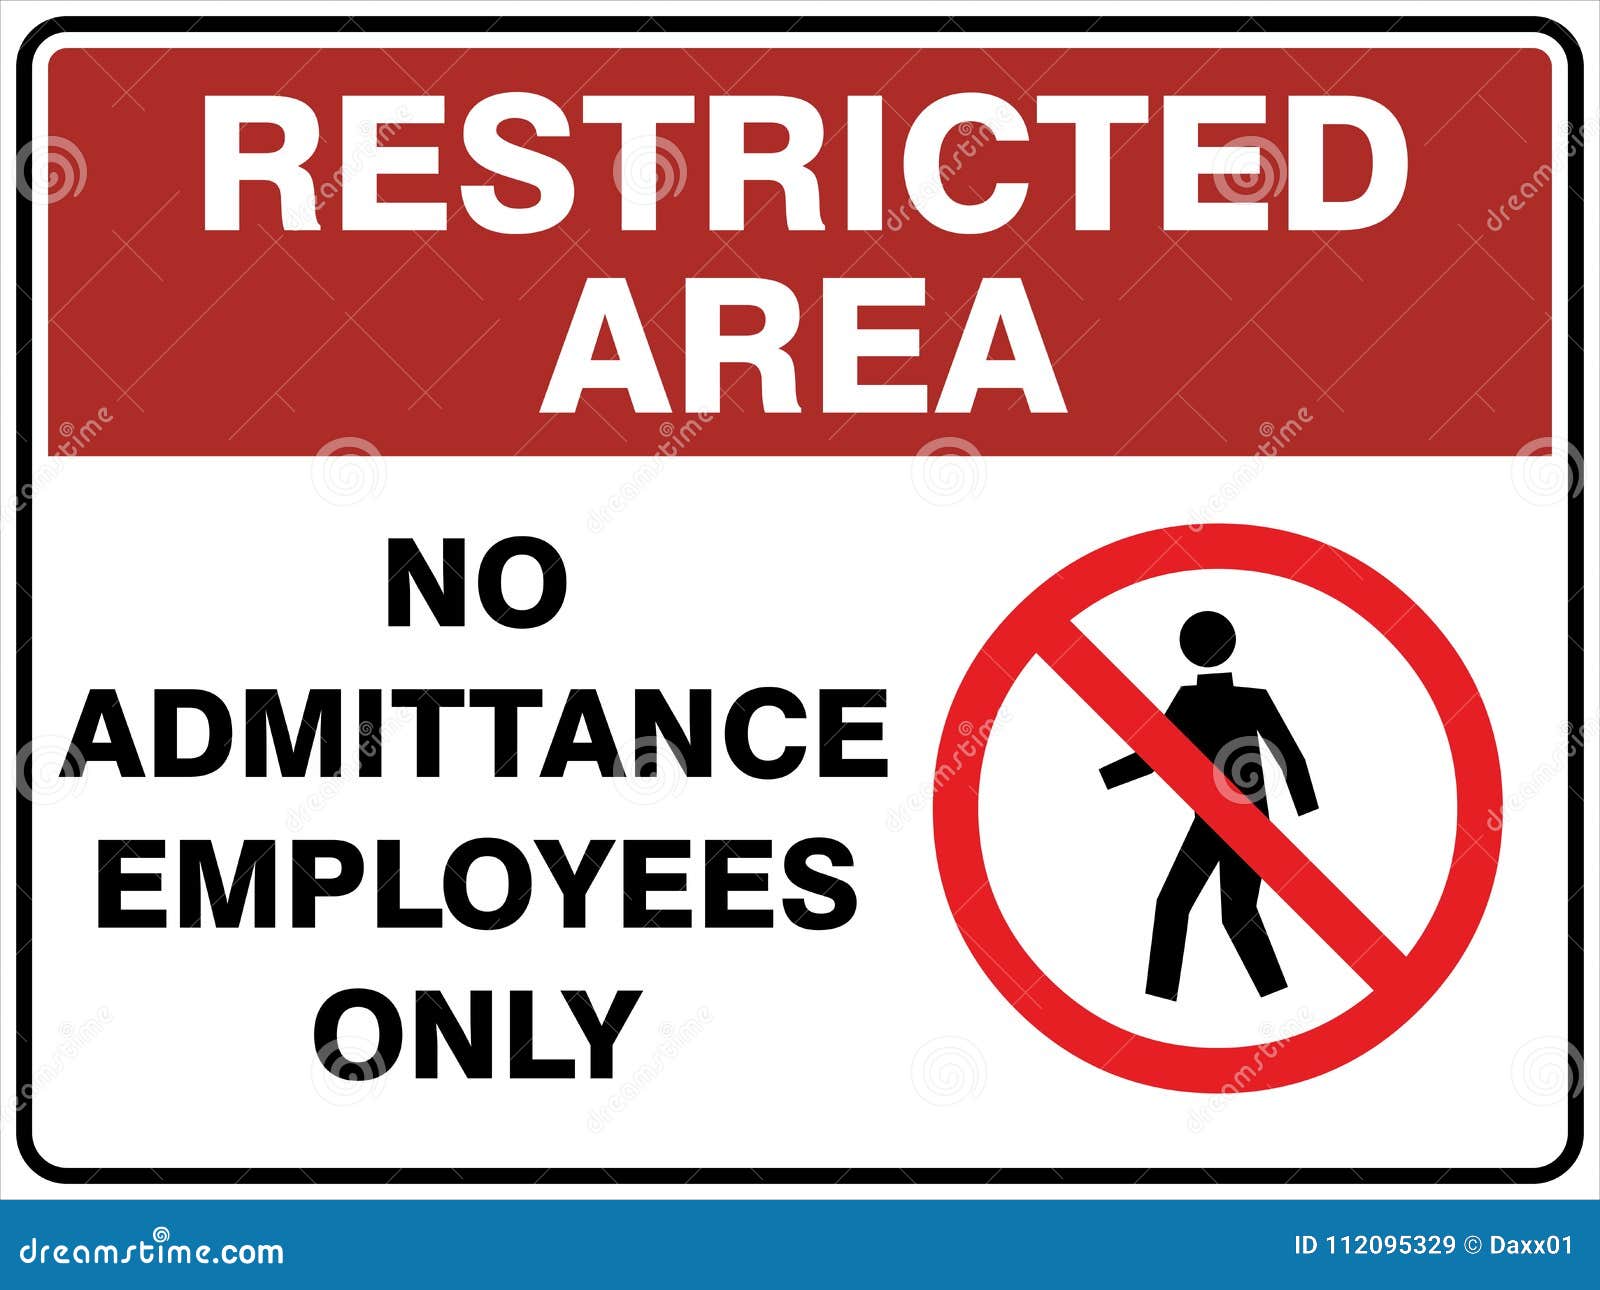 restricted area - no admittance - employees only